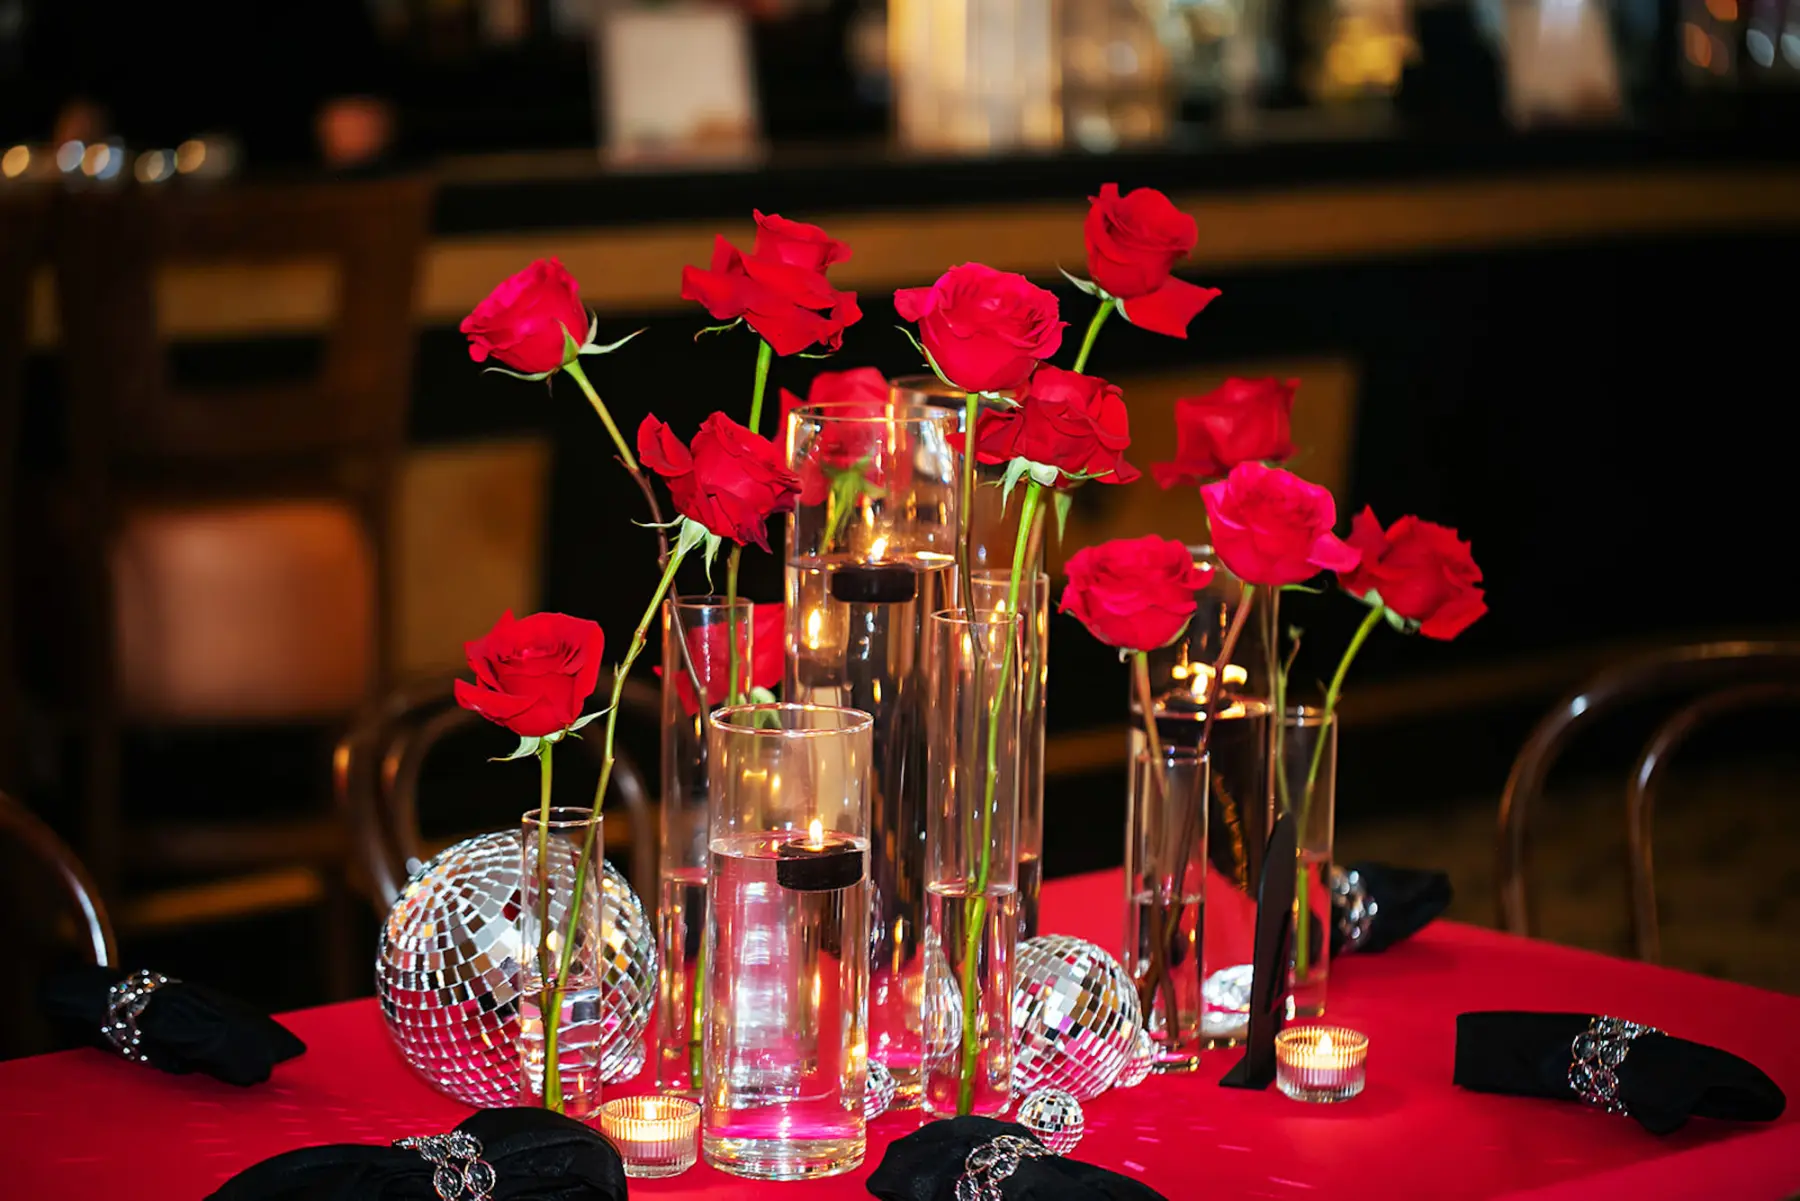 Moody Wedding Reception Red Roses In Bud Vase and Disco Ball Centerpiece Decor Ideas